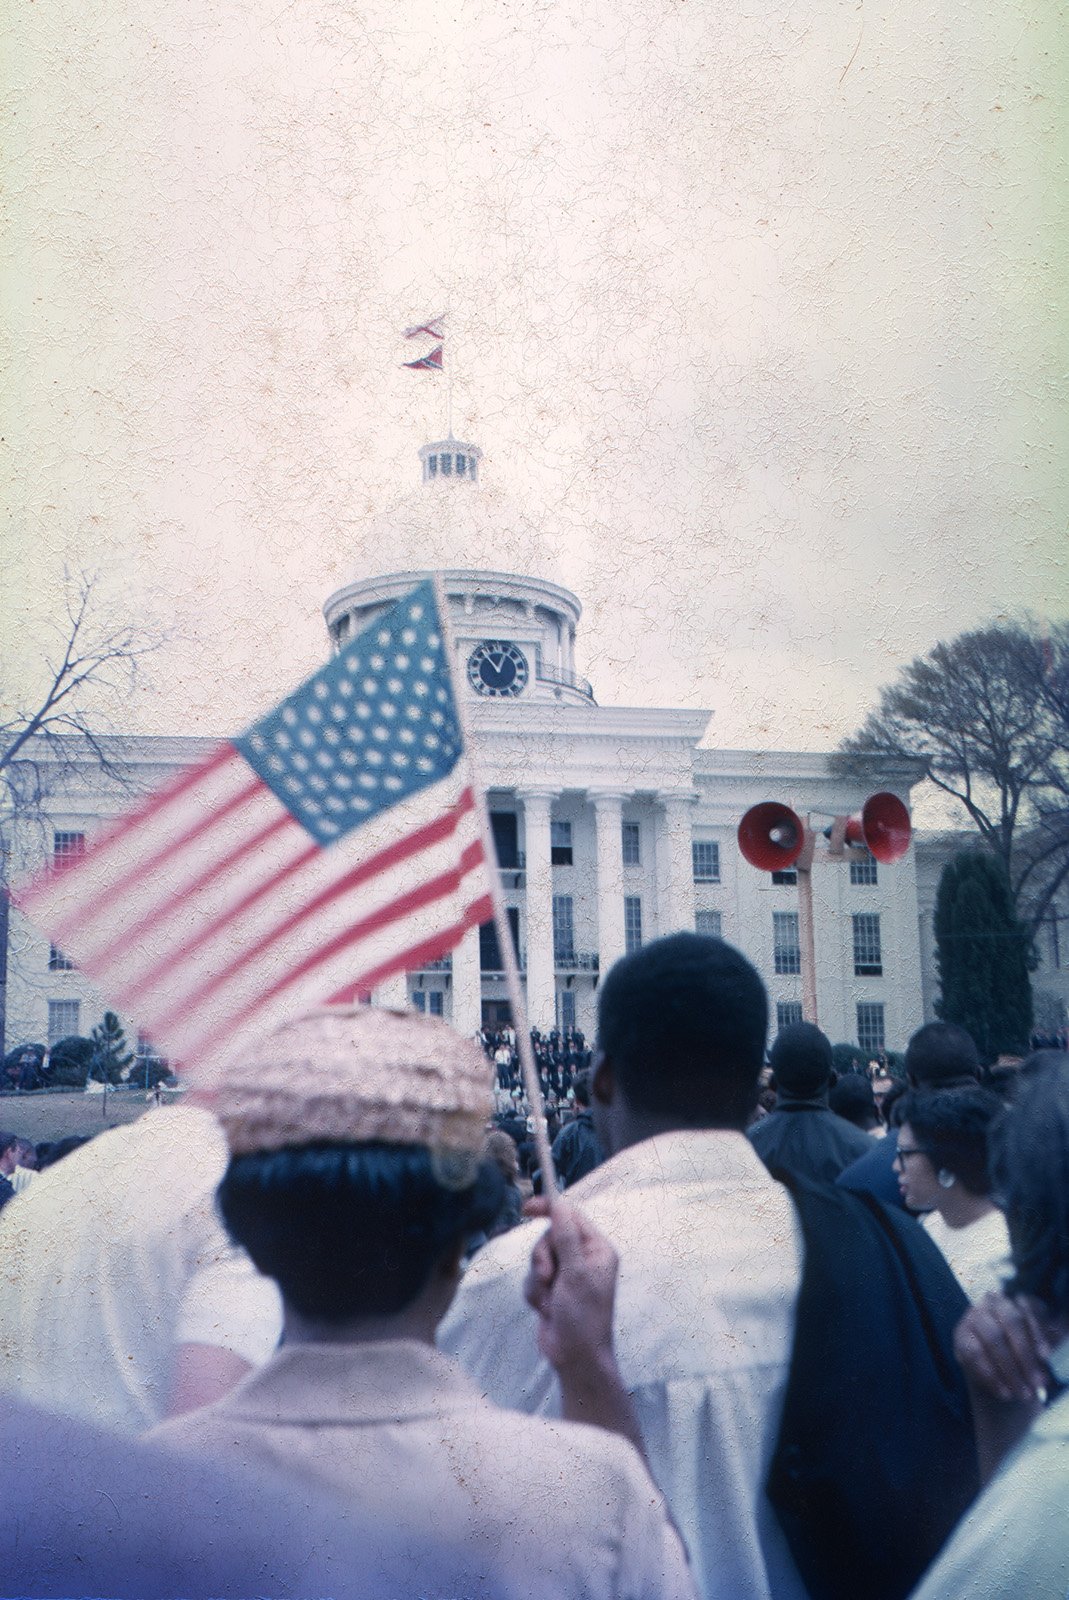 At the Alabama State Capitol. Note the flags flying atop the capitol, Alabama state flag on top, confederate flag below. The only US flag in this photo is being held by a marcher.